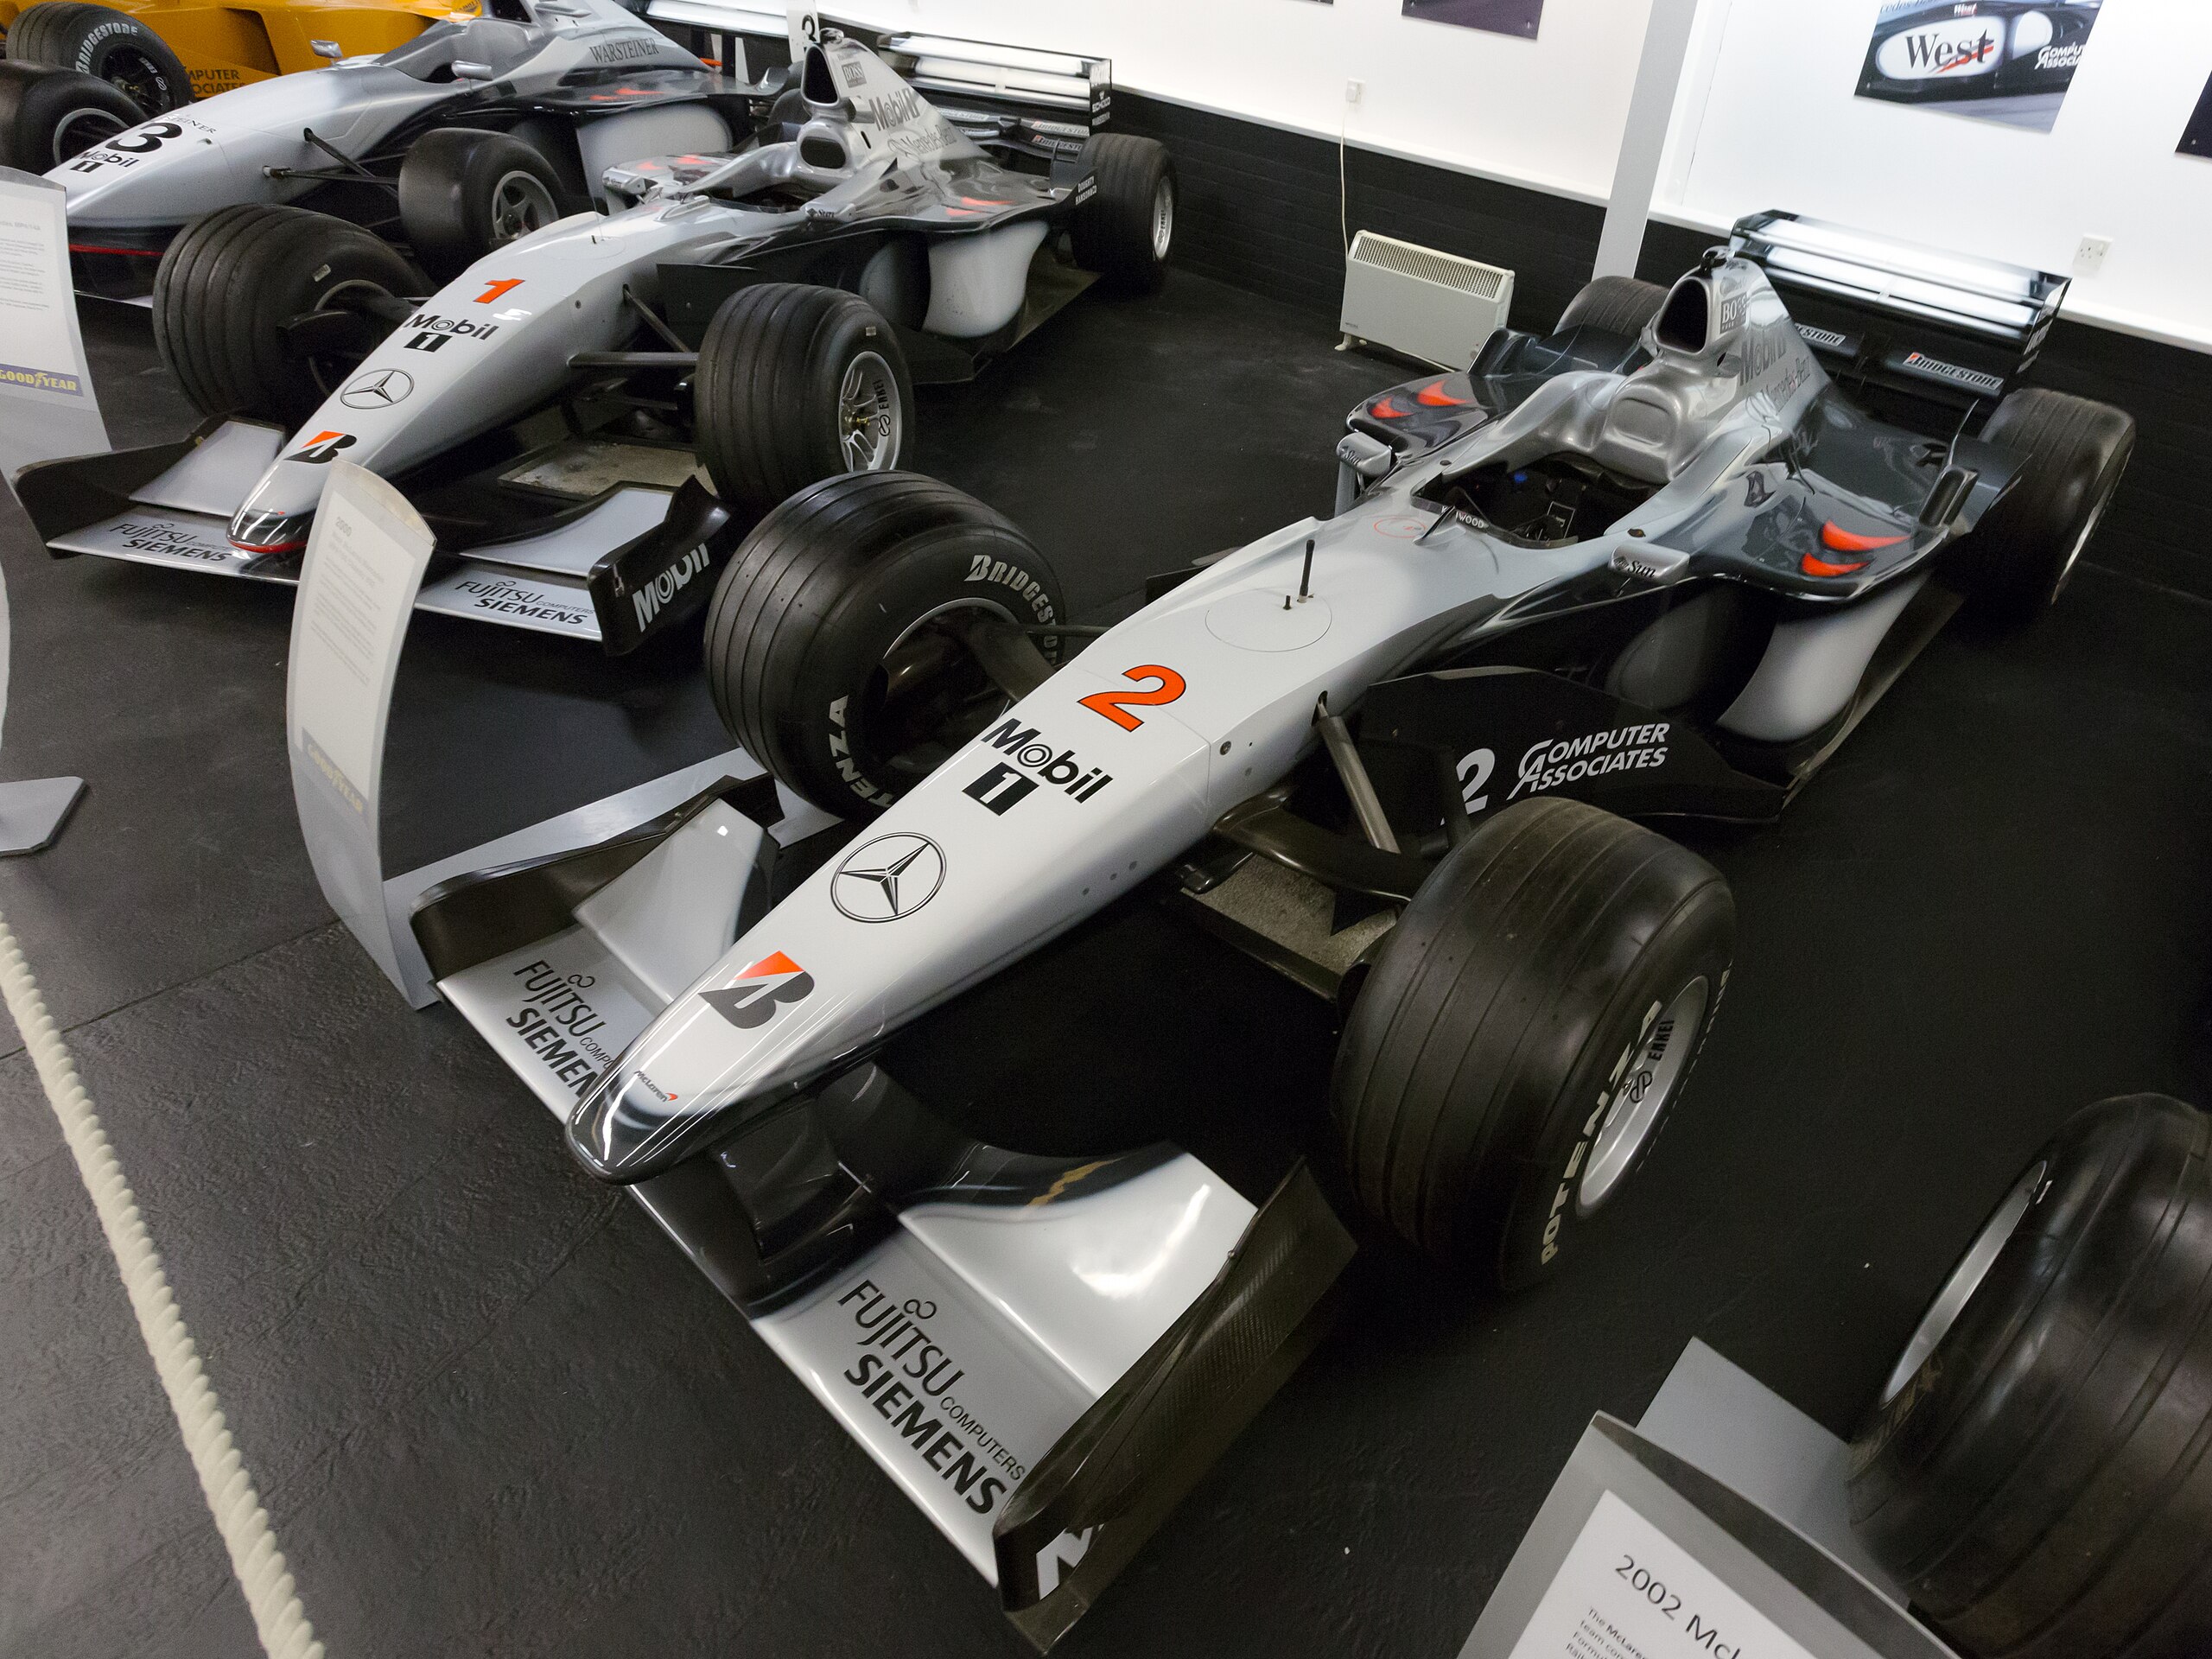 File:McLaren MP4-15 and MP4-14 Donington Grand Prix Collection.jpg - Wikimedia Commons